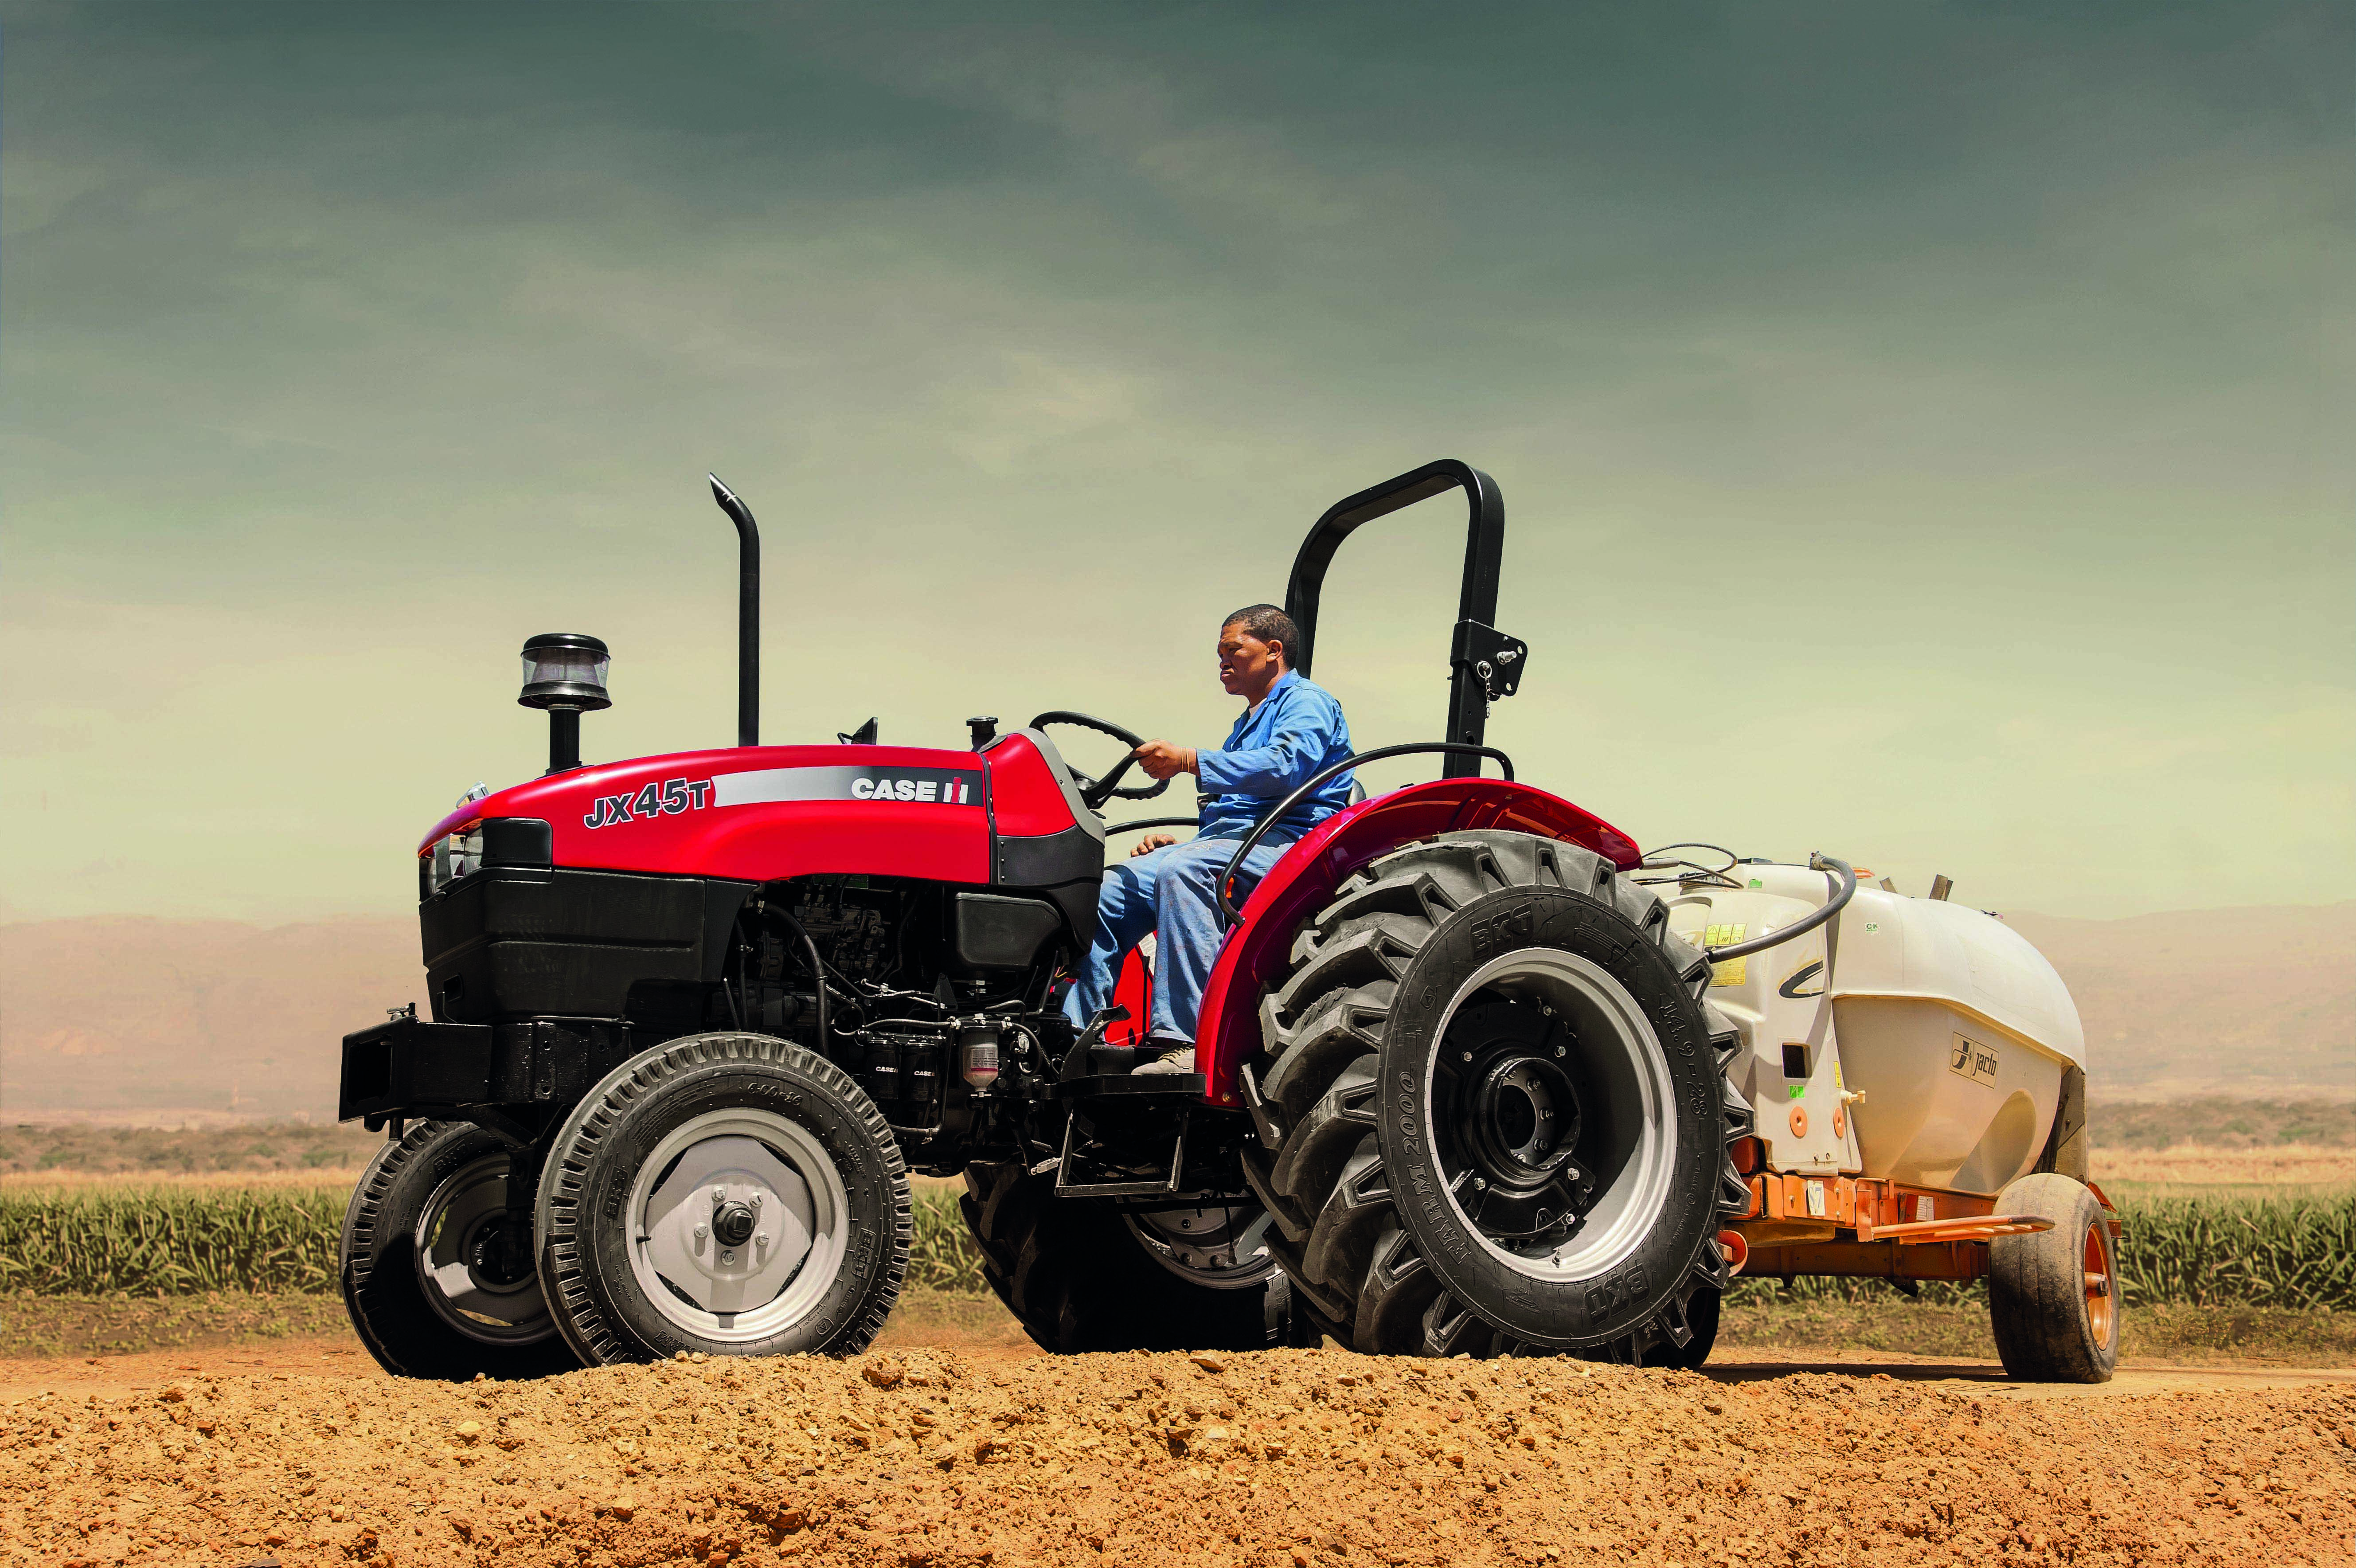 CASE IH EXTENDS JXT SERIES TRACTOR RANGE WITH NEW COMPACT MODELS